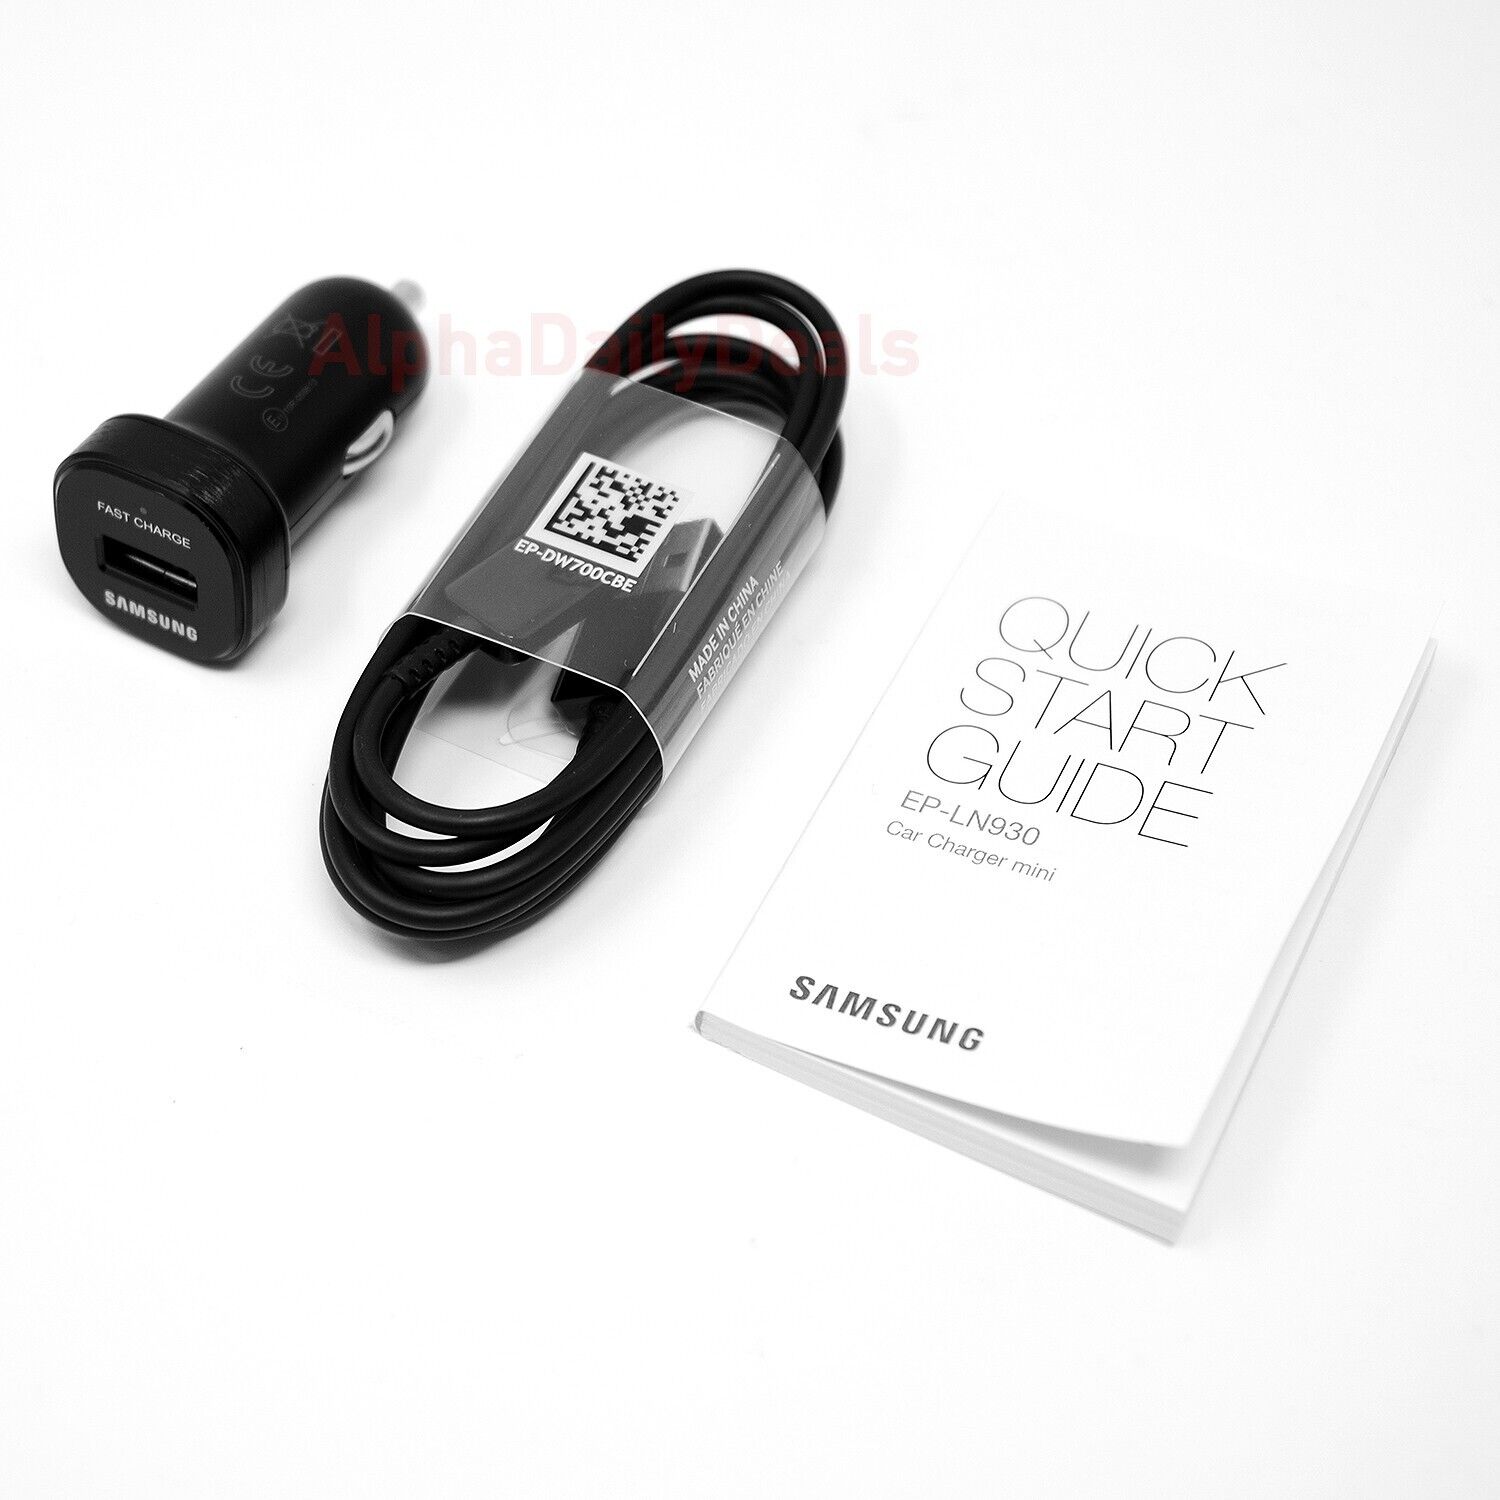 Genuine OEM Samsung Galaxy Fast Charge Mini Vehicle Car Charger Type C USB Cable